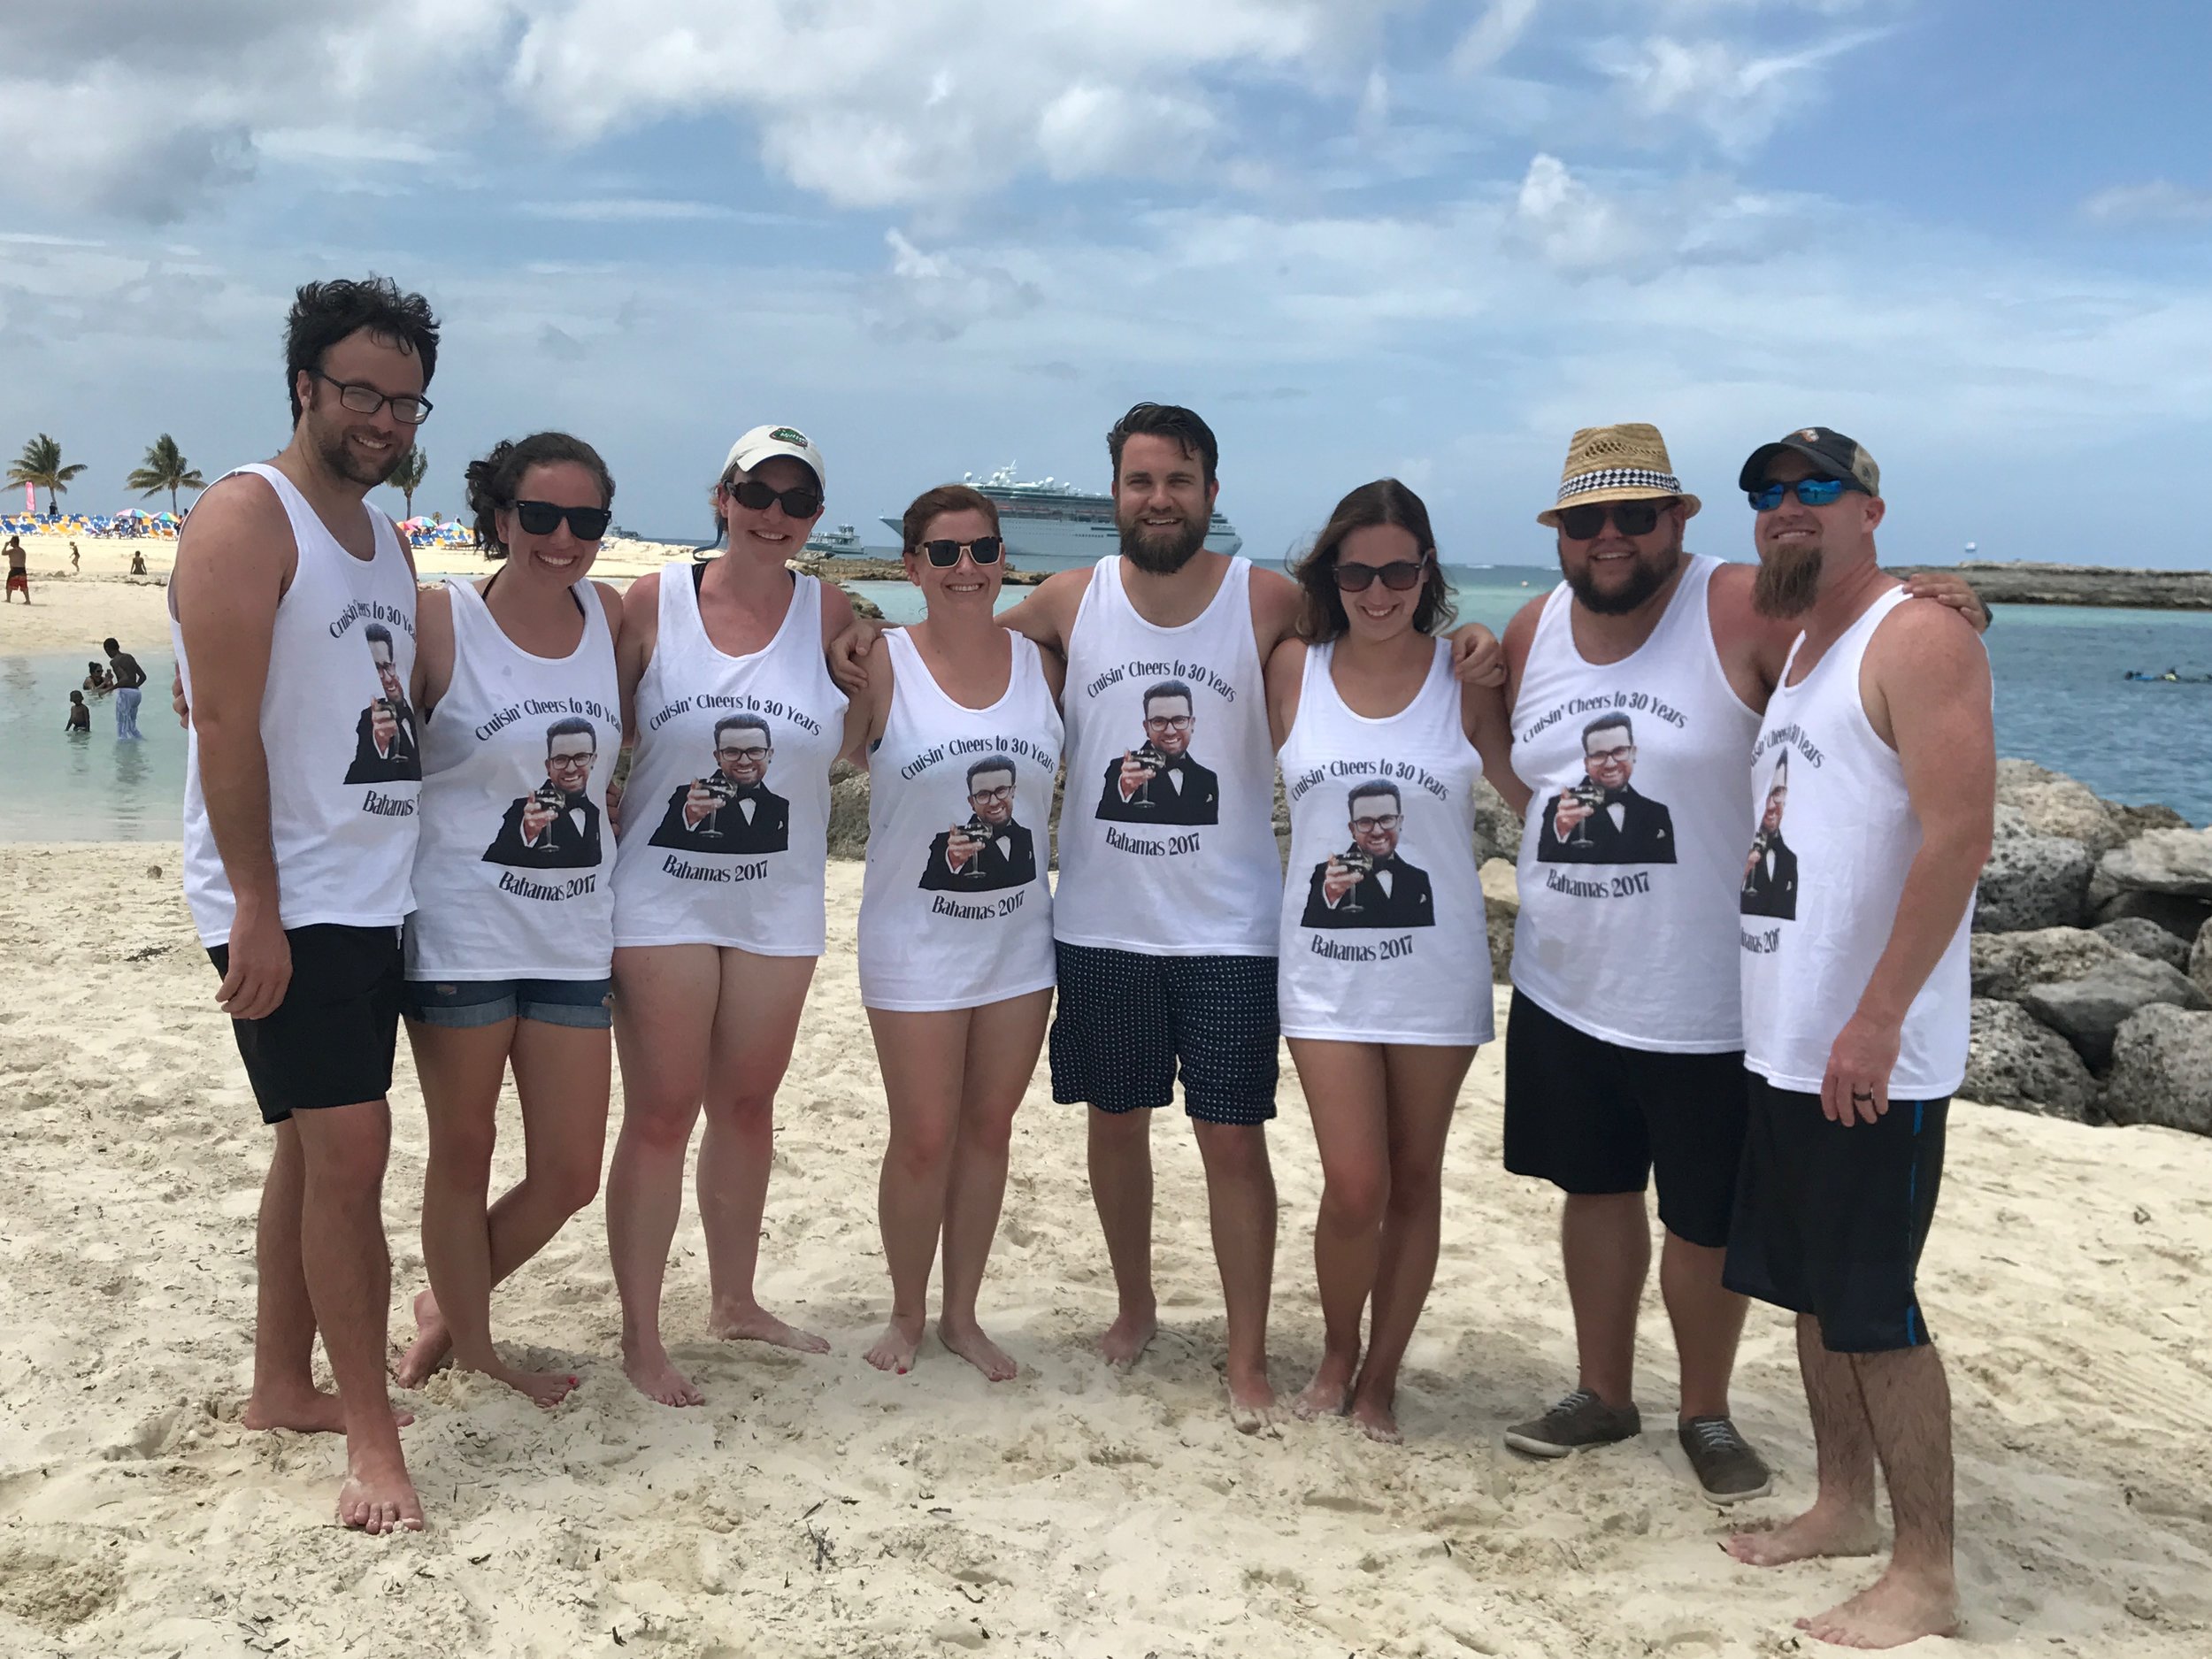  We went on our first cruise since our honeymoon, to the Bahamas, with a few friends to celebrate David Shepherd’s 30th birthday! 